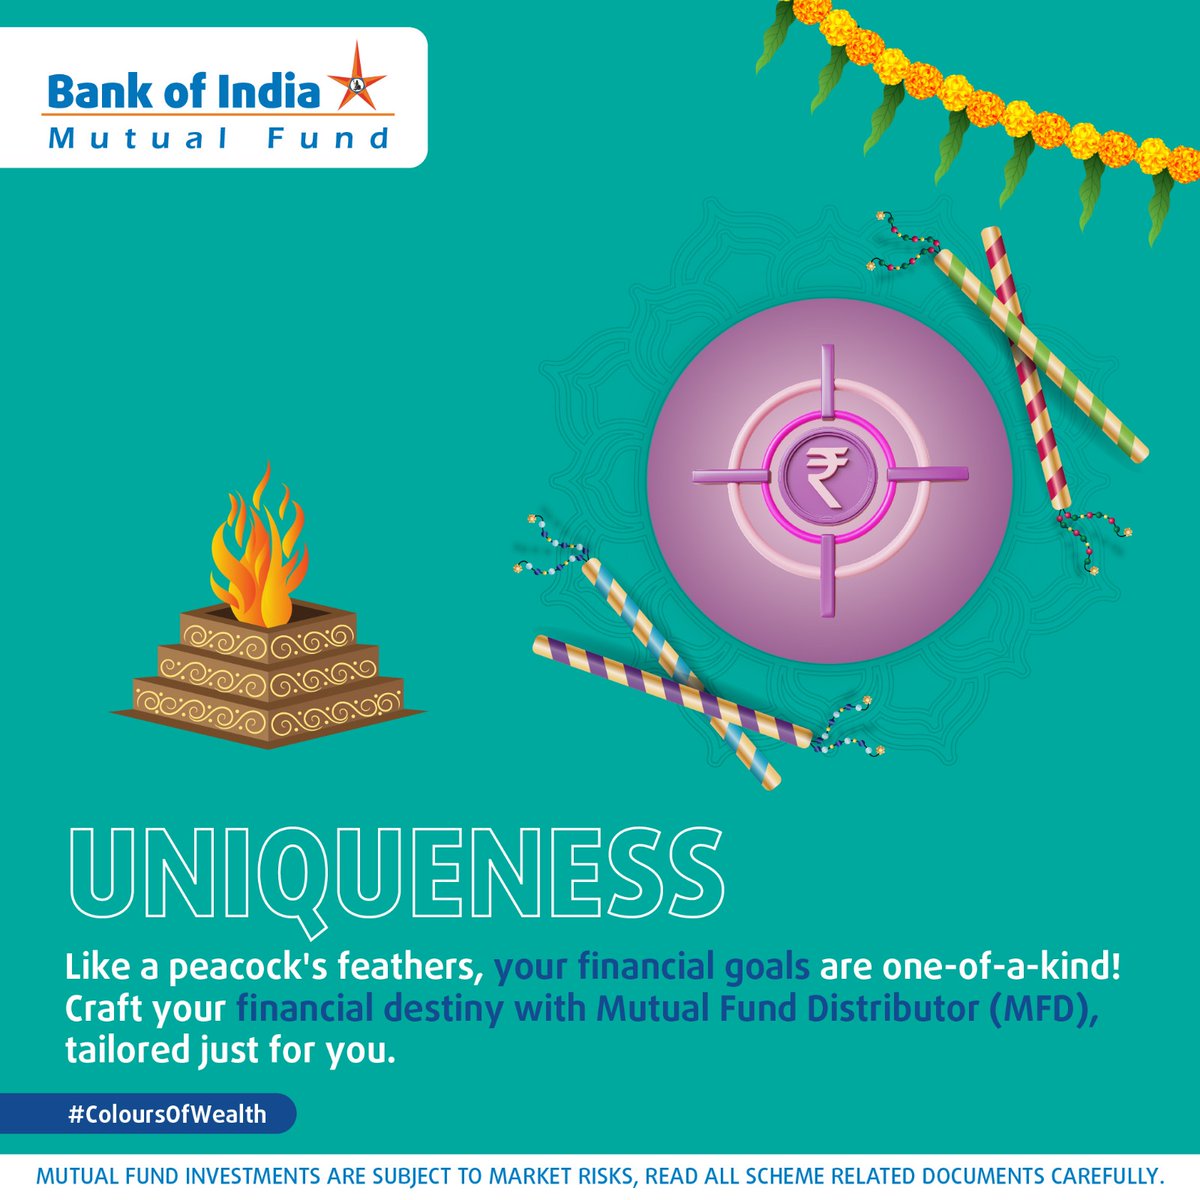 May your financial journey be as unique as a peacock's feathers. Wishing you tailor-made success.

#BankofIndiaMutualFund #ColoursOfWealth #navratri2023 #MFD #MutualFundDistributor #momentmarketing #topical #topicalpost #investing #stayinvested #investor #financialfreedom